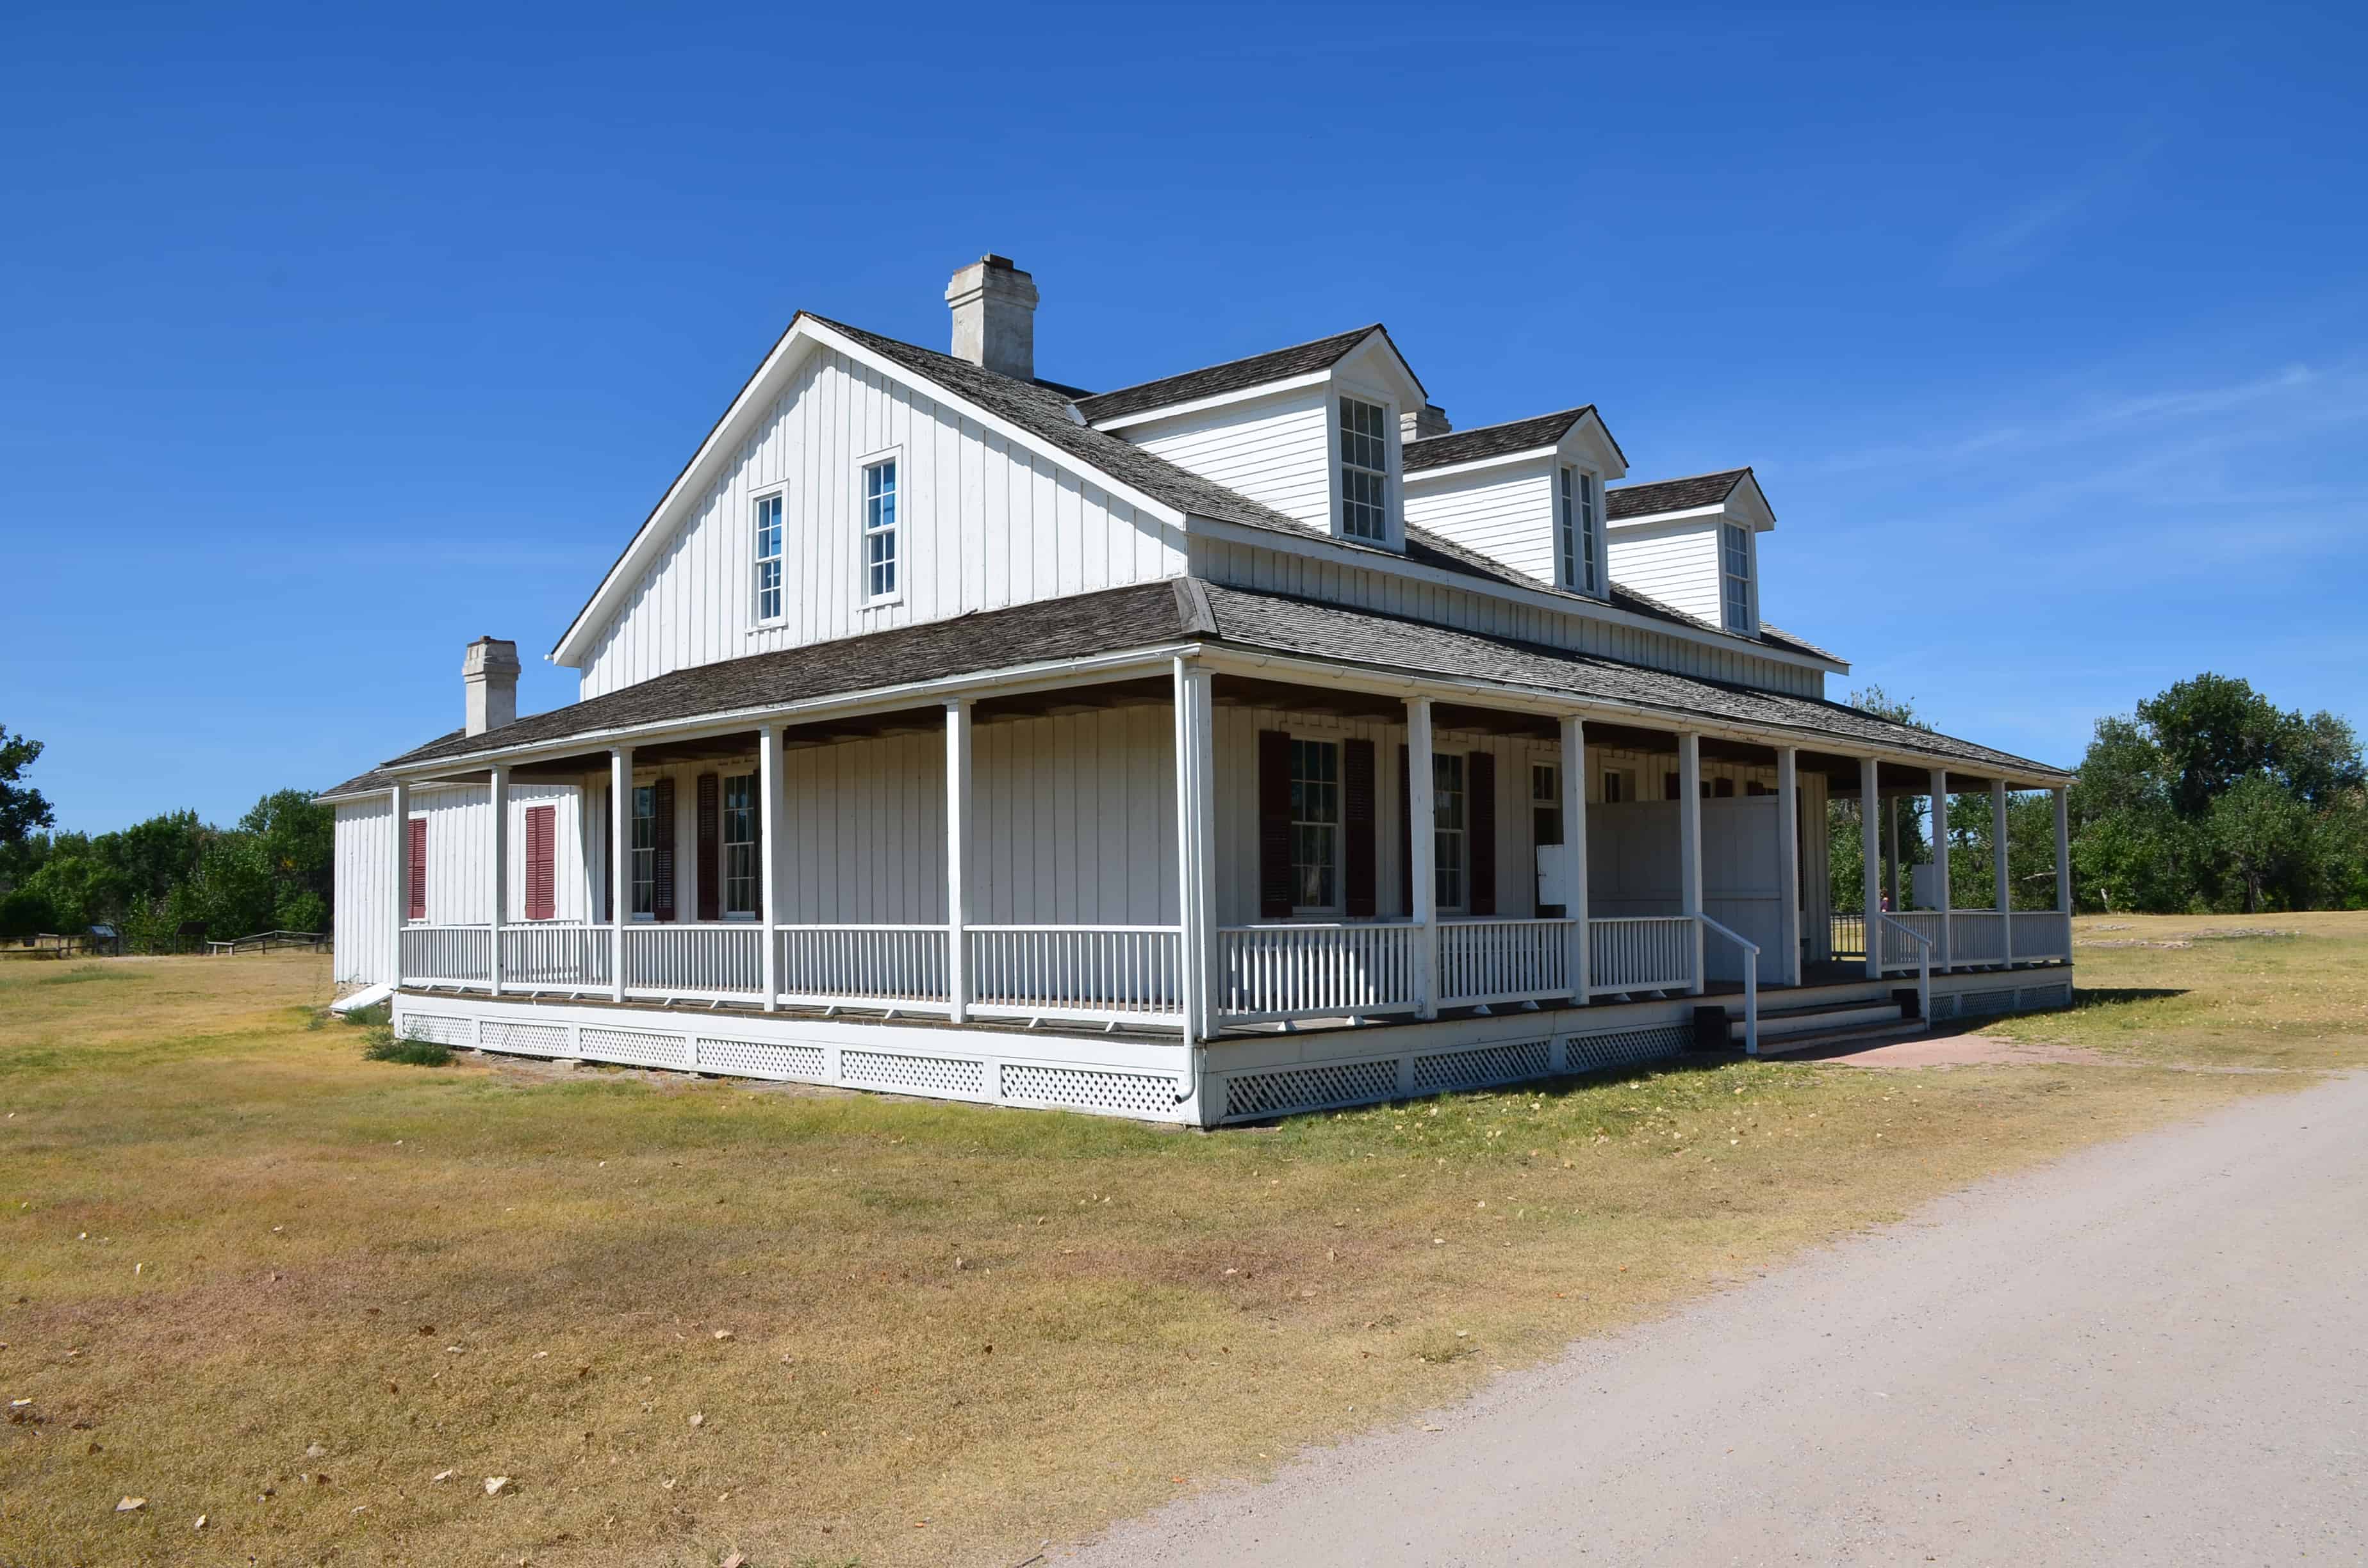 Captain's quarters at Fort Laramie National Historic Site in Wyoming